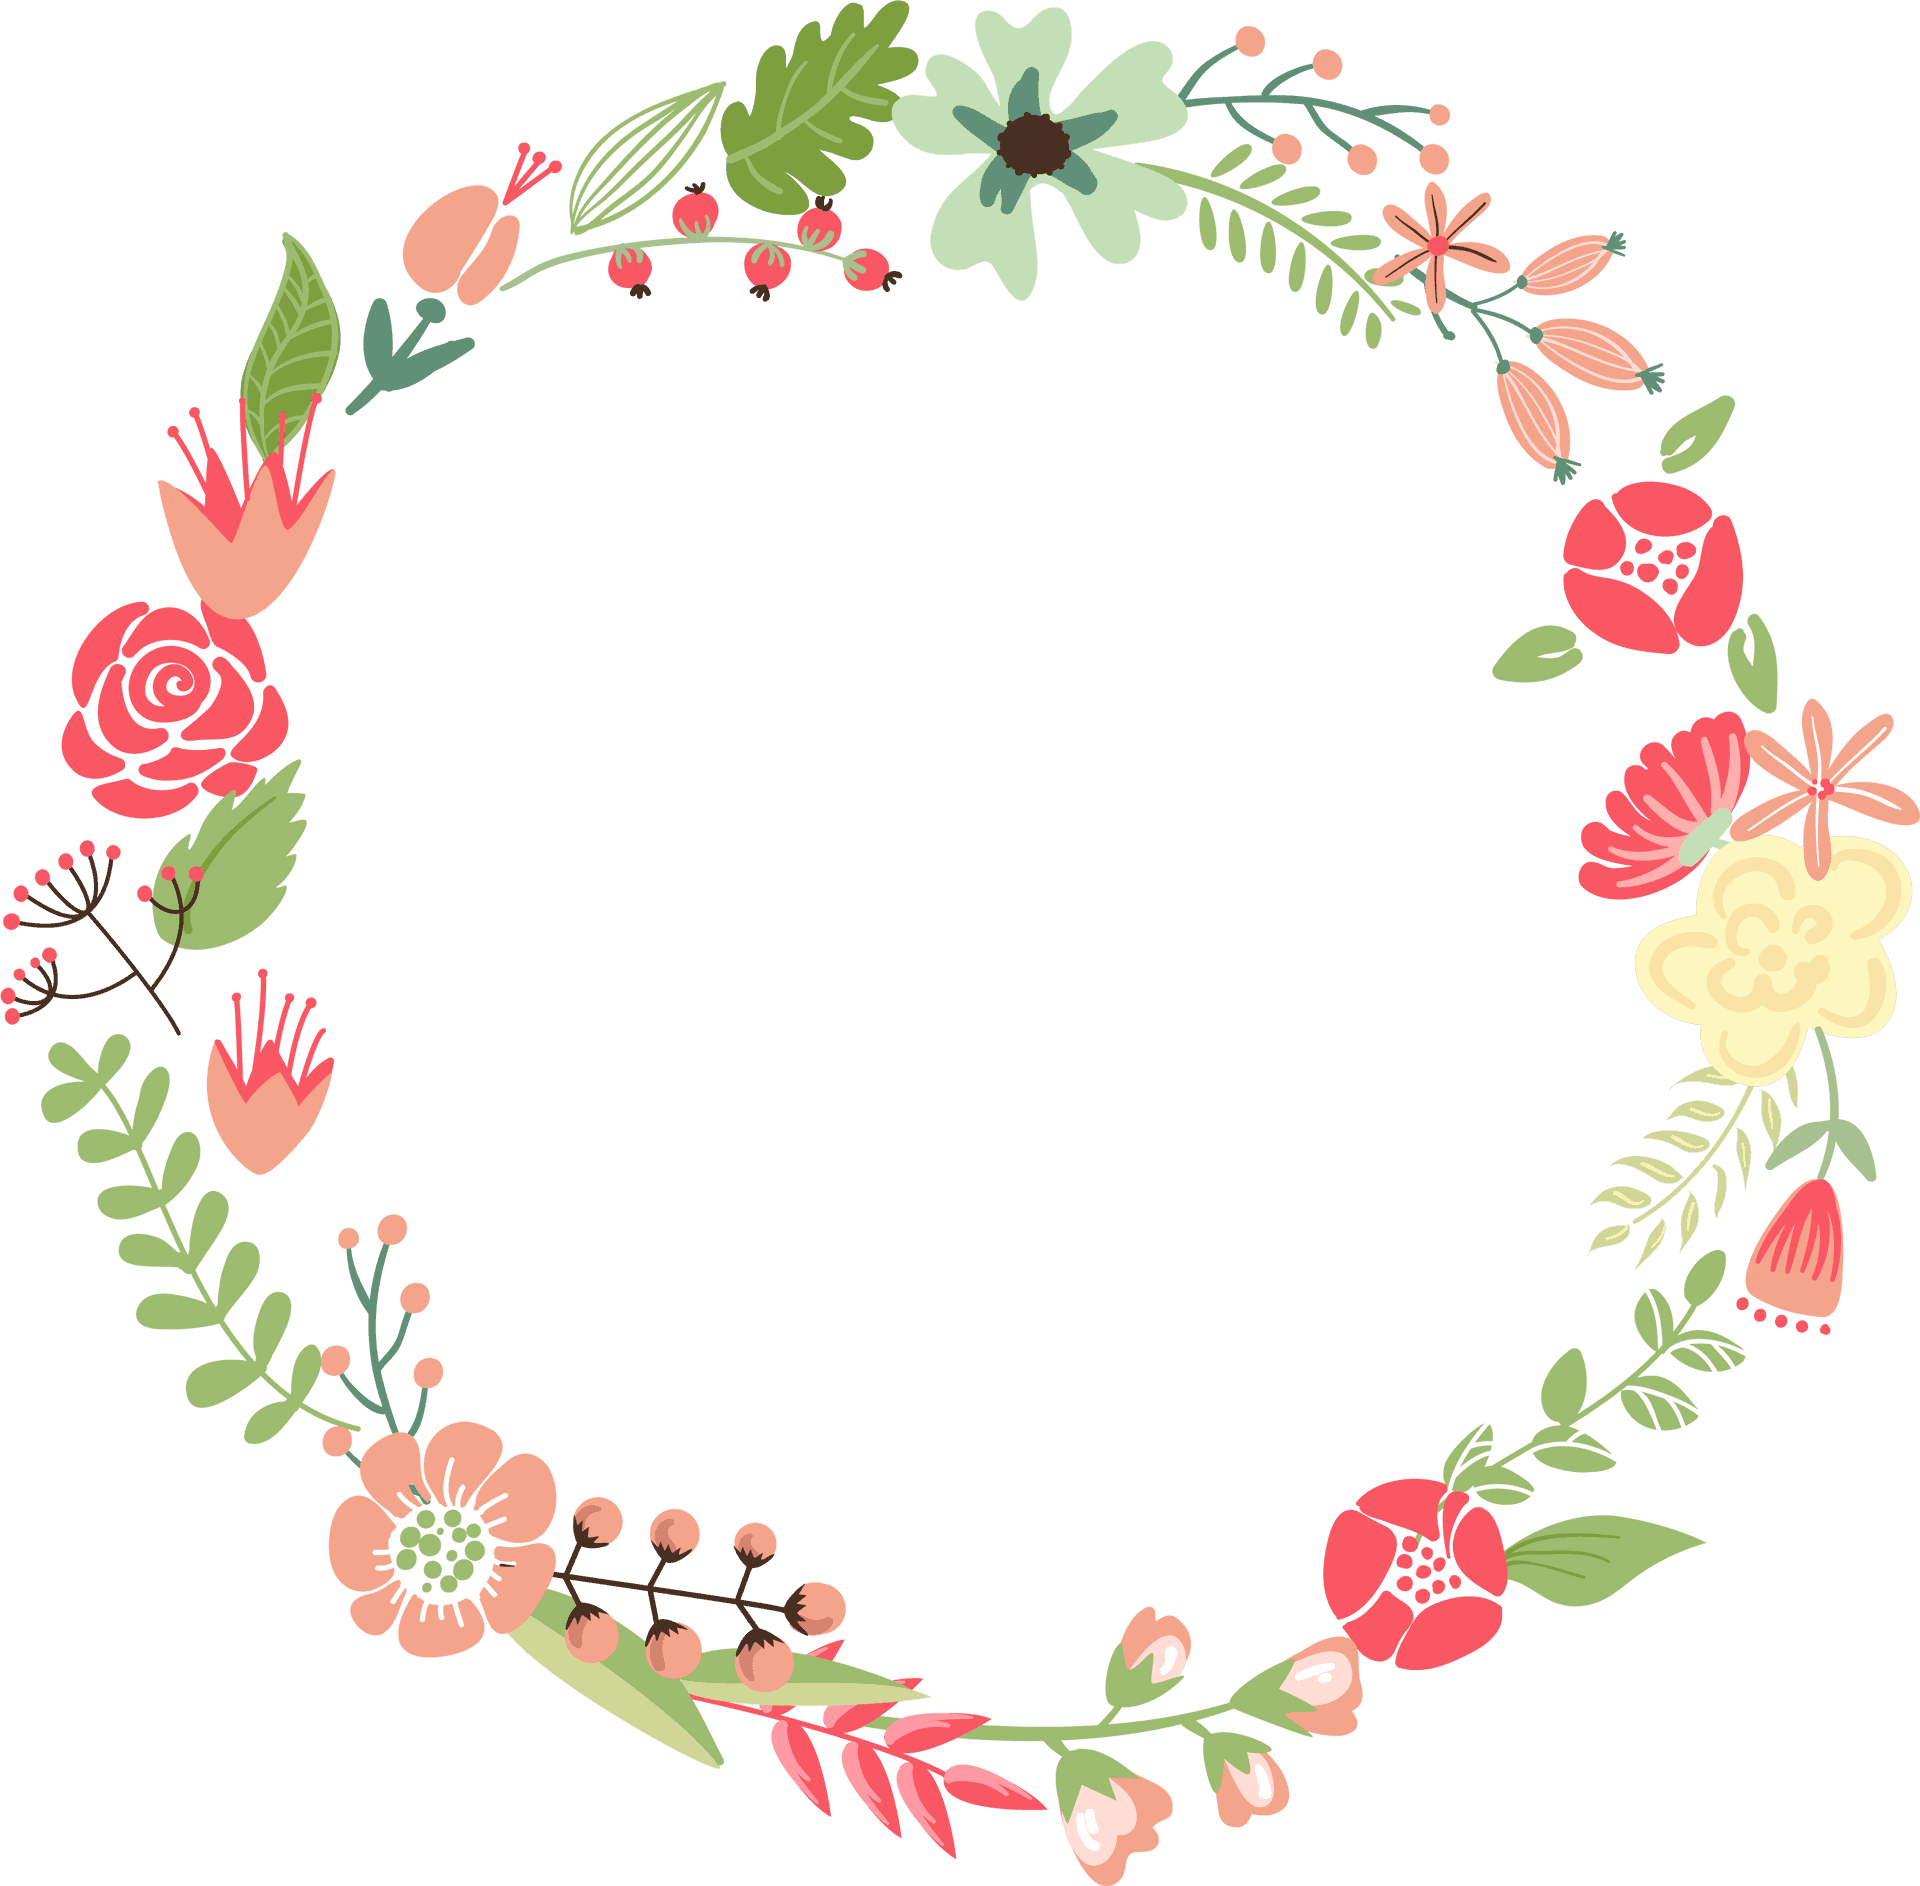 [100+] Flower Wreath Png Images | Wallpapers.com